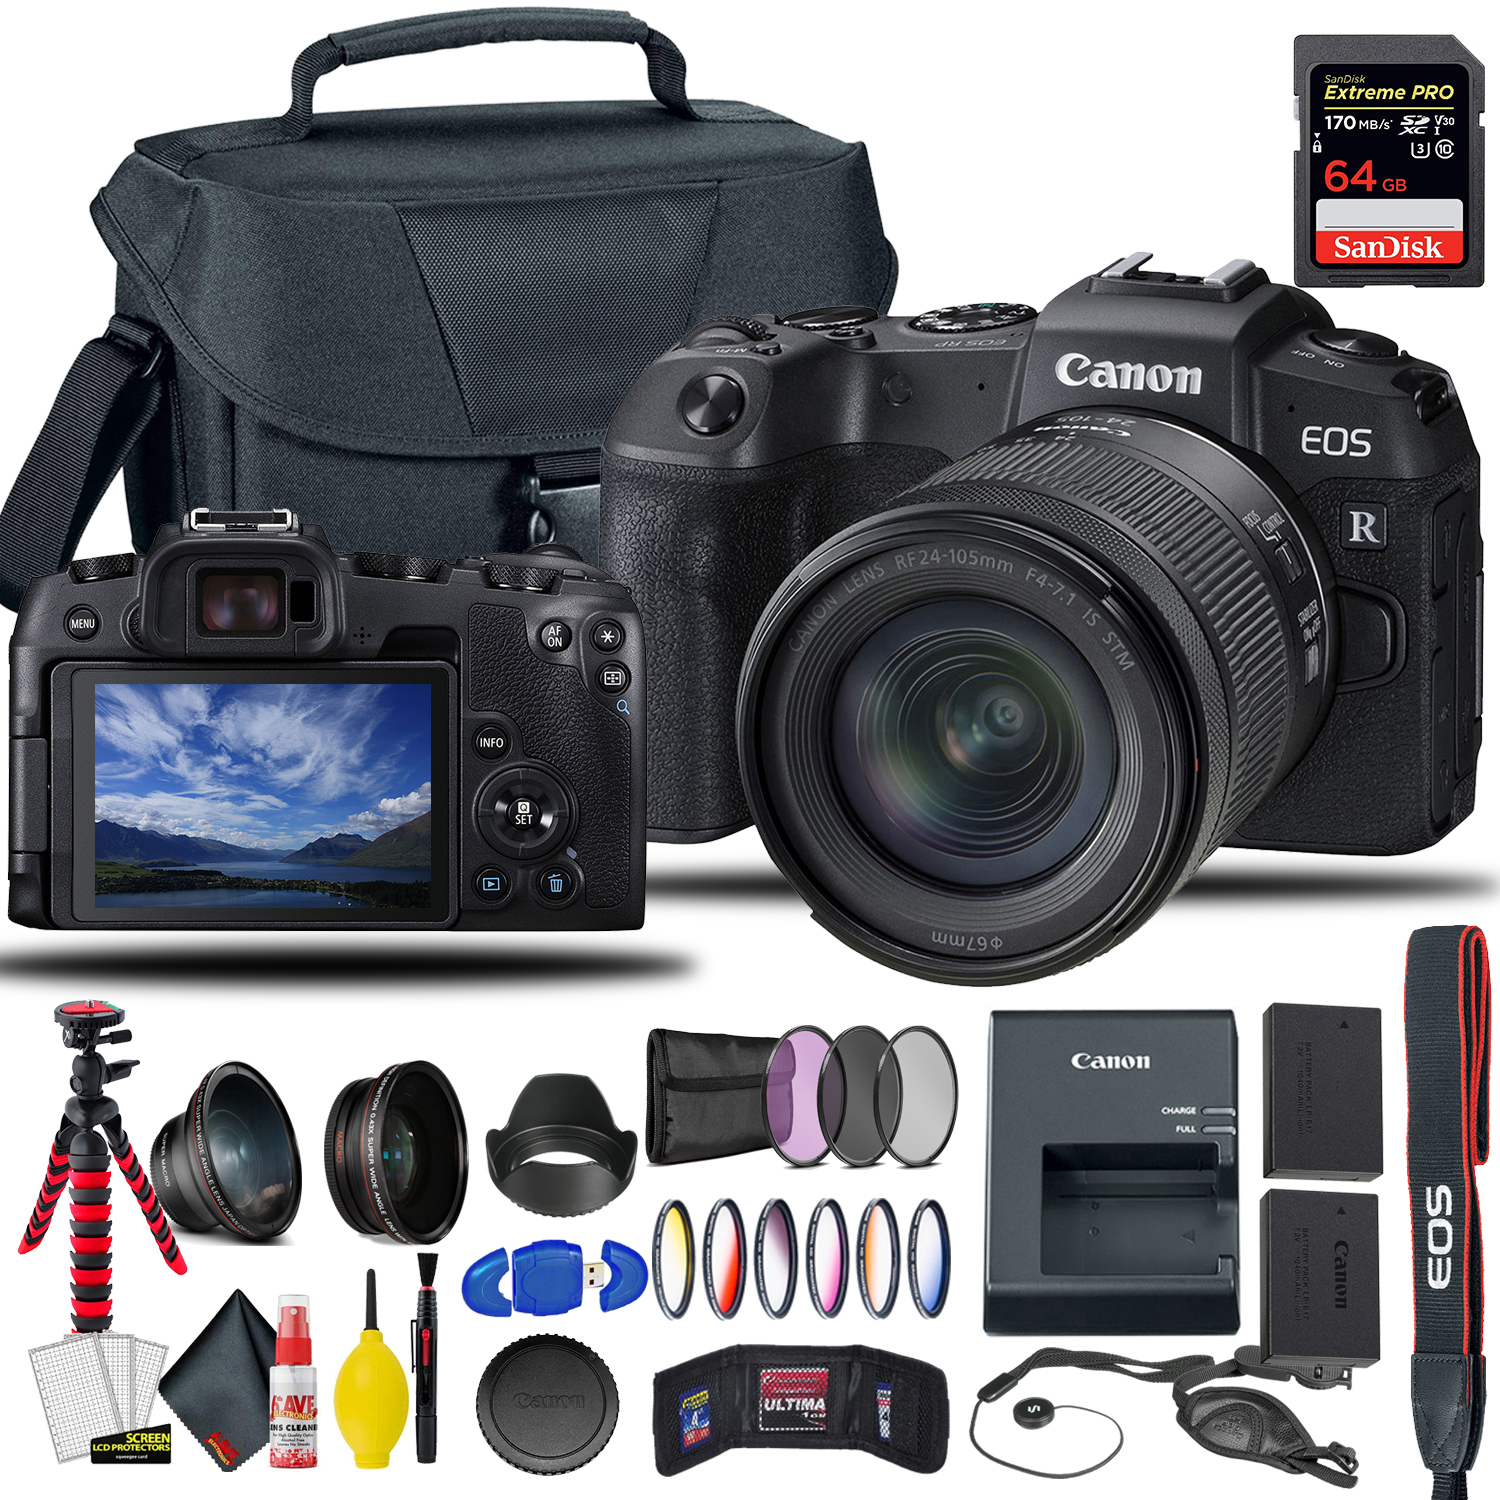 Canon EOS RP Mirrorless Digital Camera with 24-105mm f/4-7.1 Lens + Extra Canon Battery, Creative Filters + EOS Camera Bag + Sandisk Extreme Pro 64GB Card + 6AVE Cleaning Set, + More - image 1 of 4